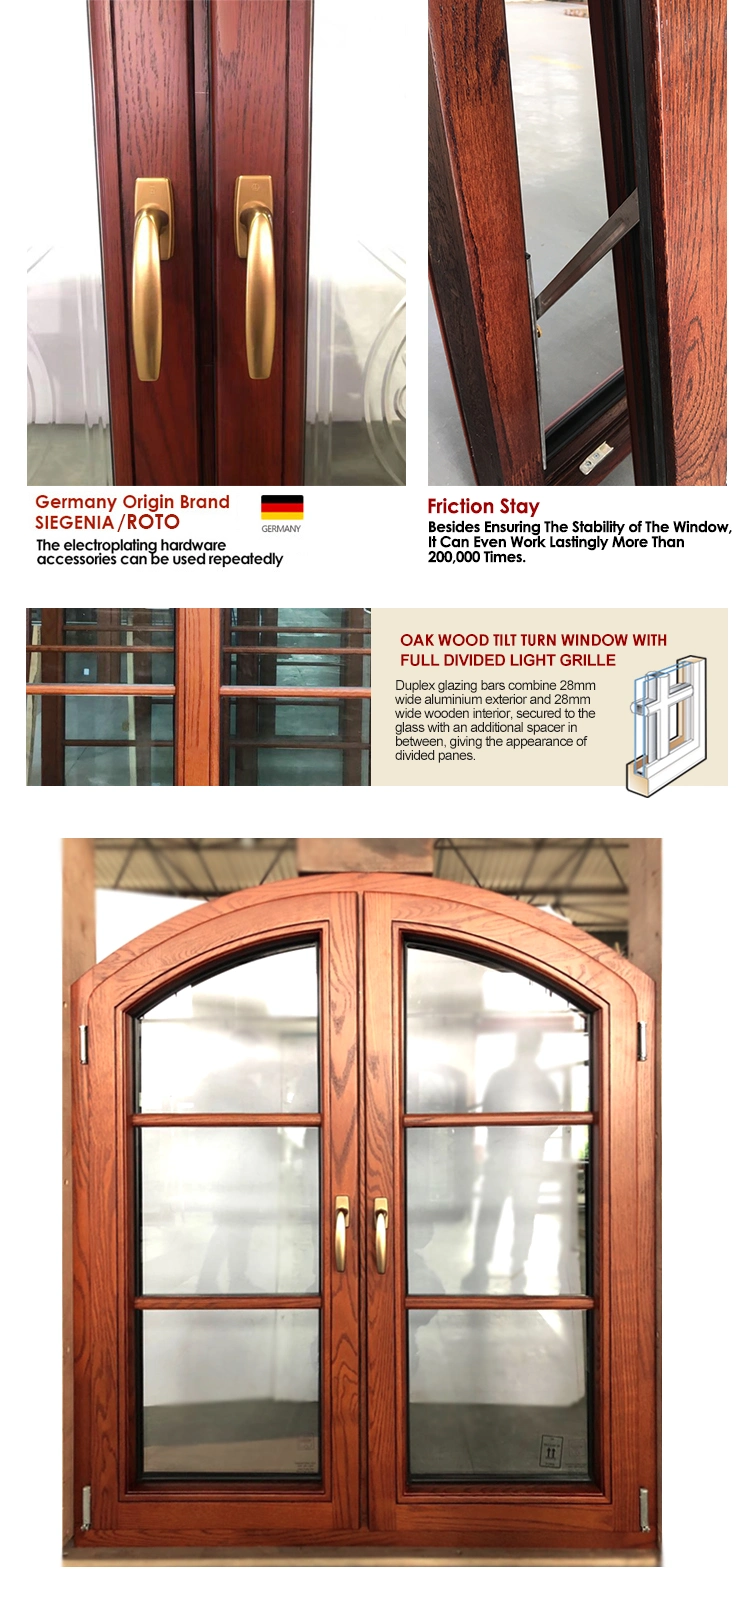 Arched Wooden Pattern Awning Window with Double Glazing Glass Wholesale Oak Wood Window Design